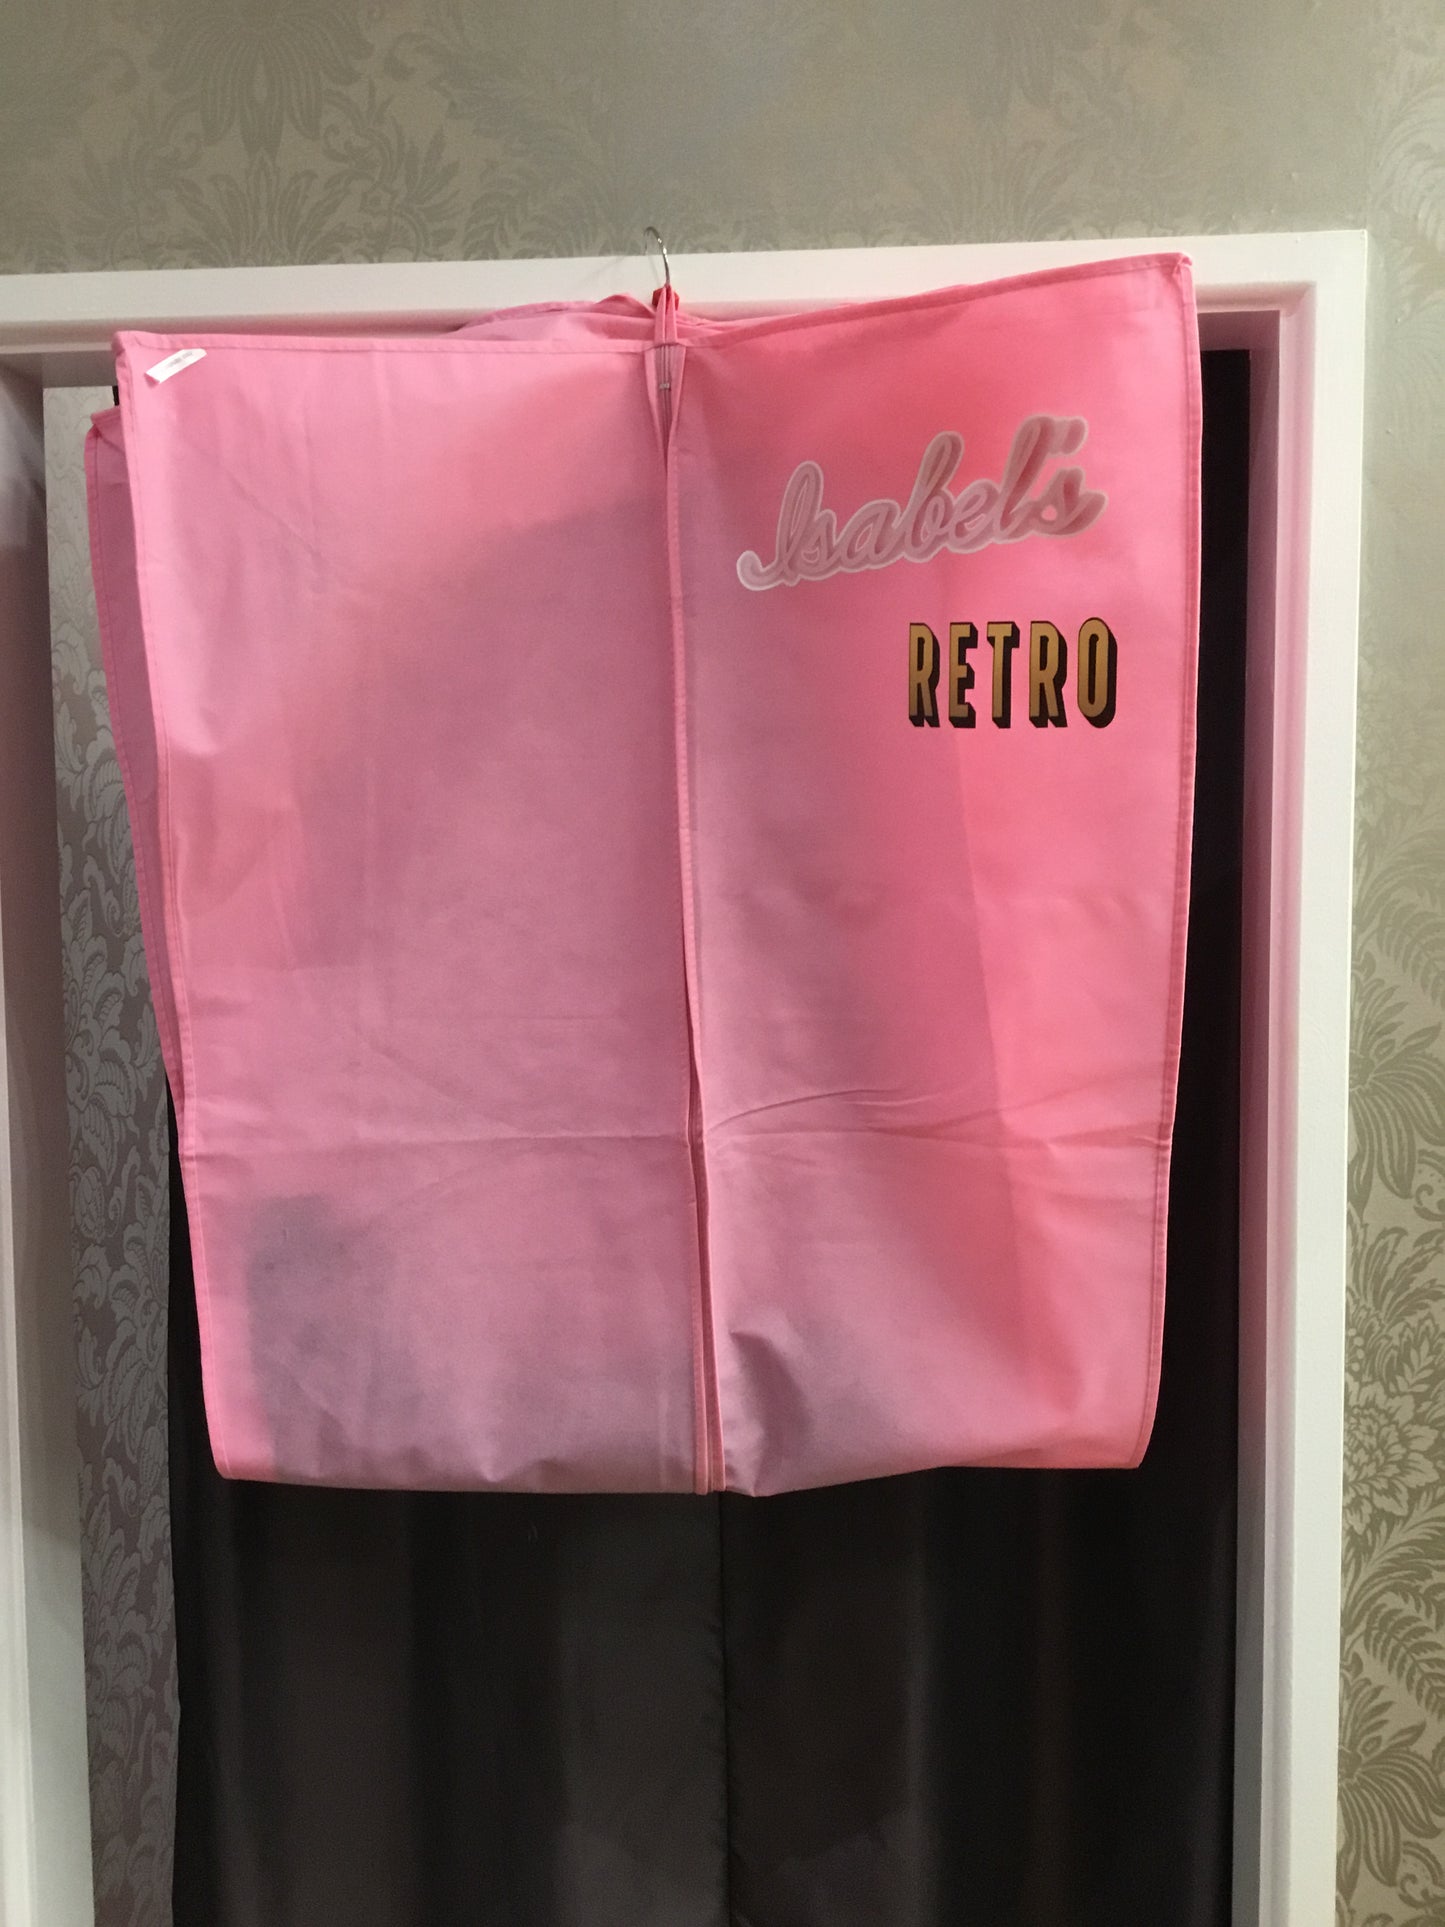 Dress cover - Isabel’s Retro & Vintage Clothing